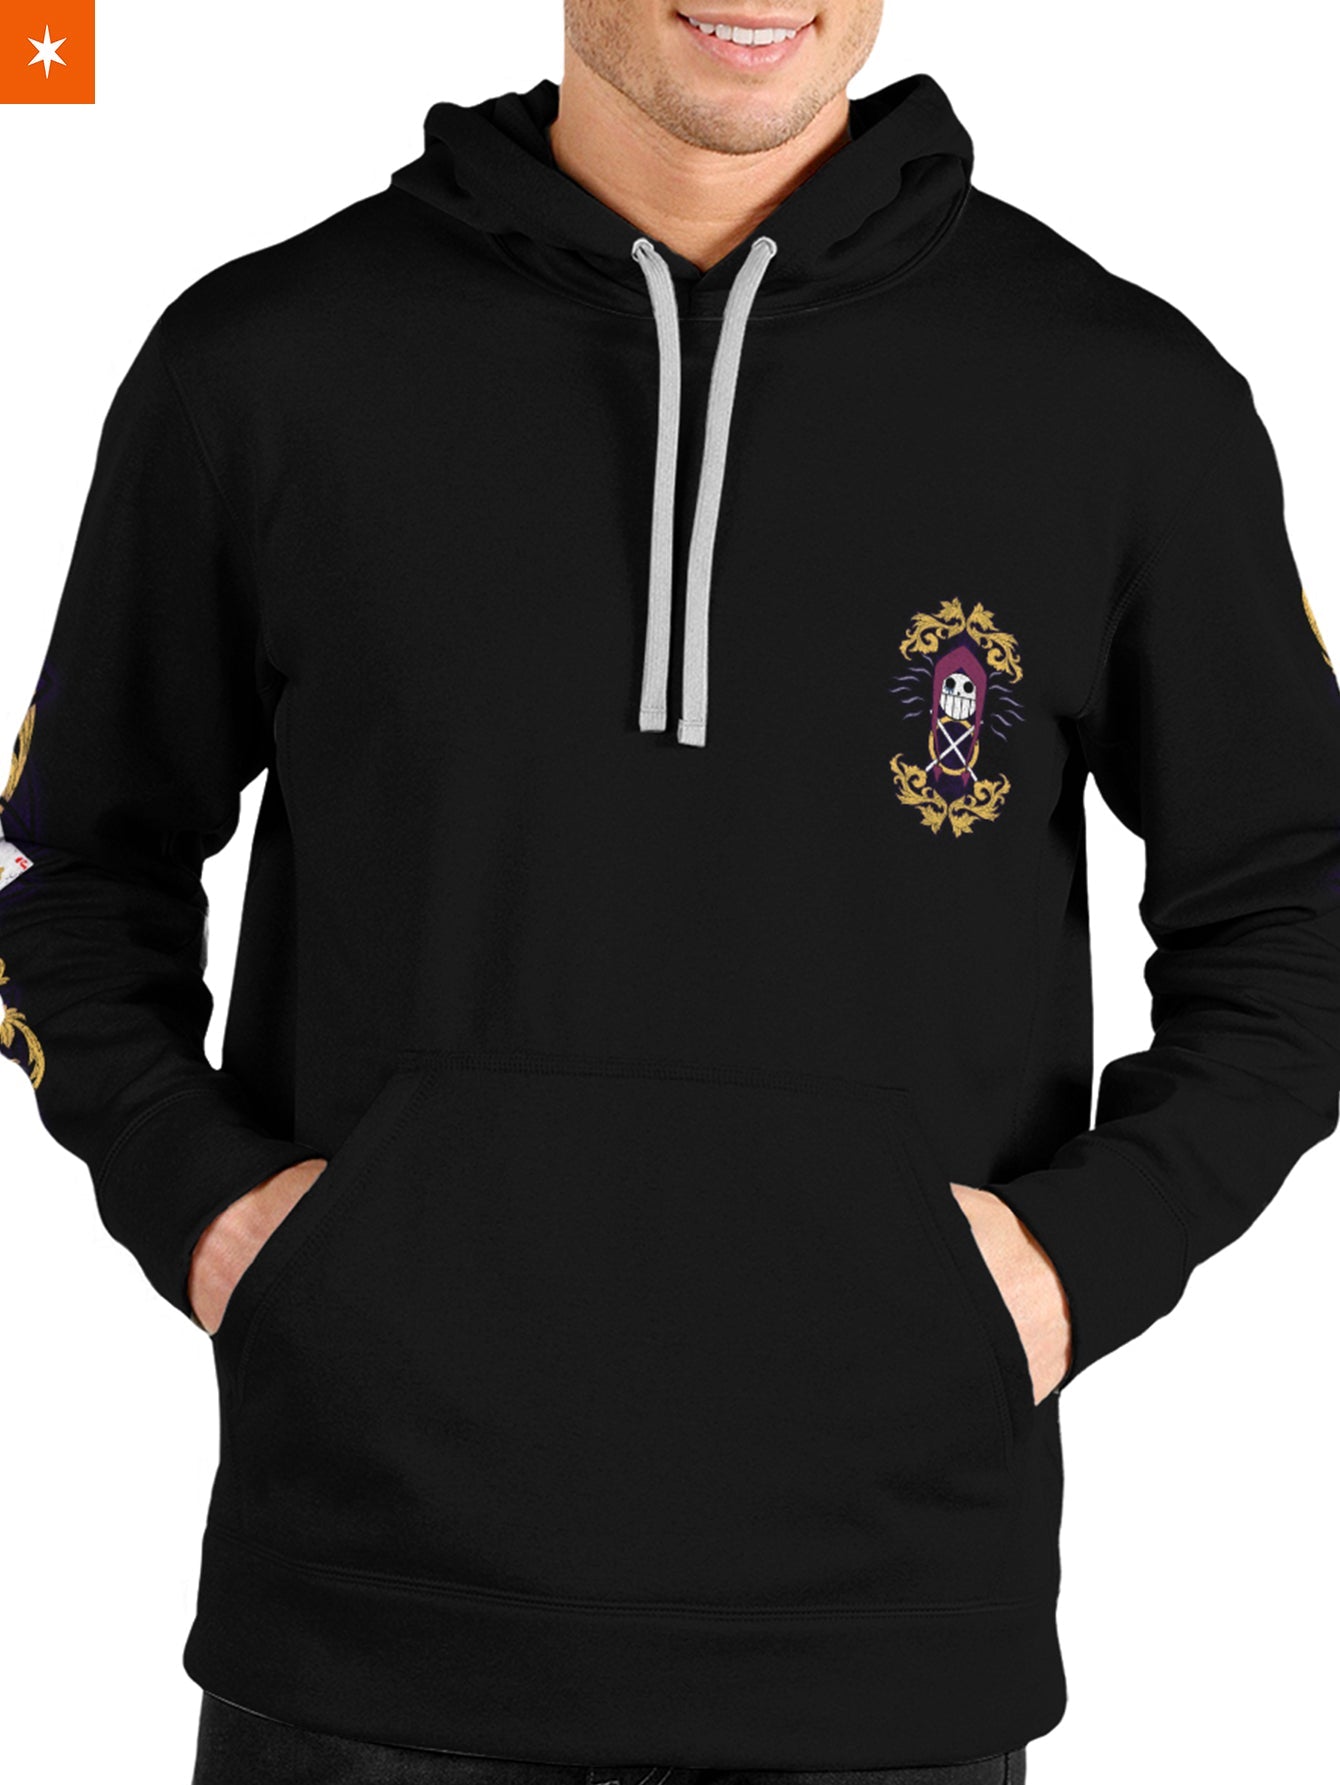 Fandomaniax - The Jack of Hearts Unisex Pullover Hoodie